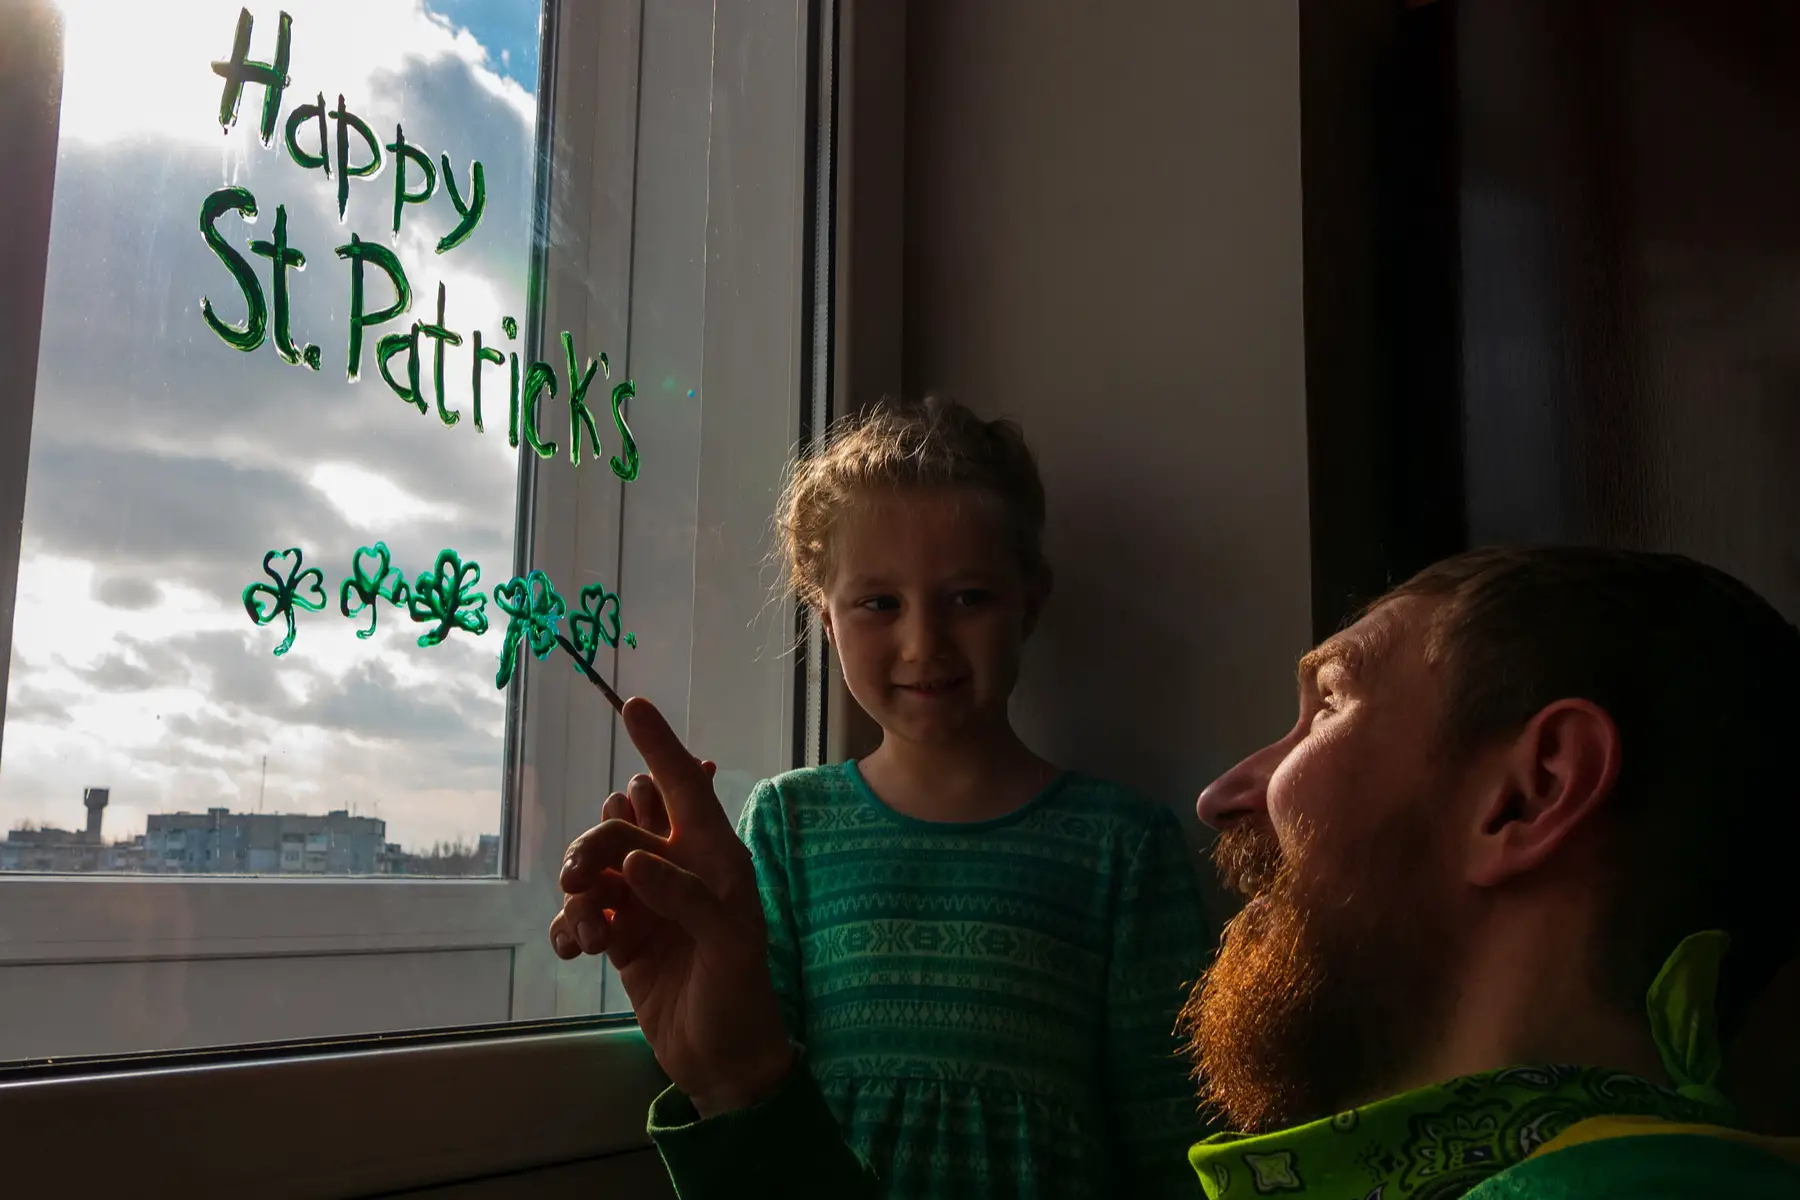 Daughter at home with dad painting window for St. Patricks Day, a public holiday in Northern Ireland